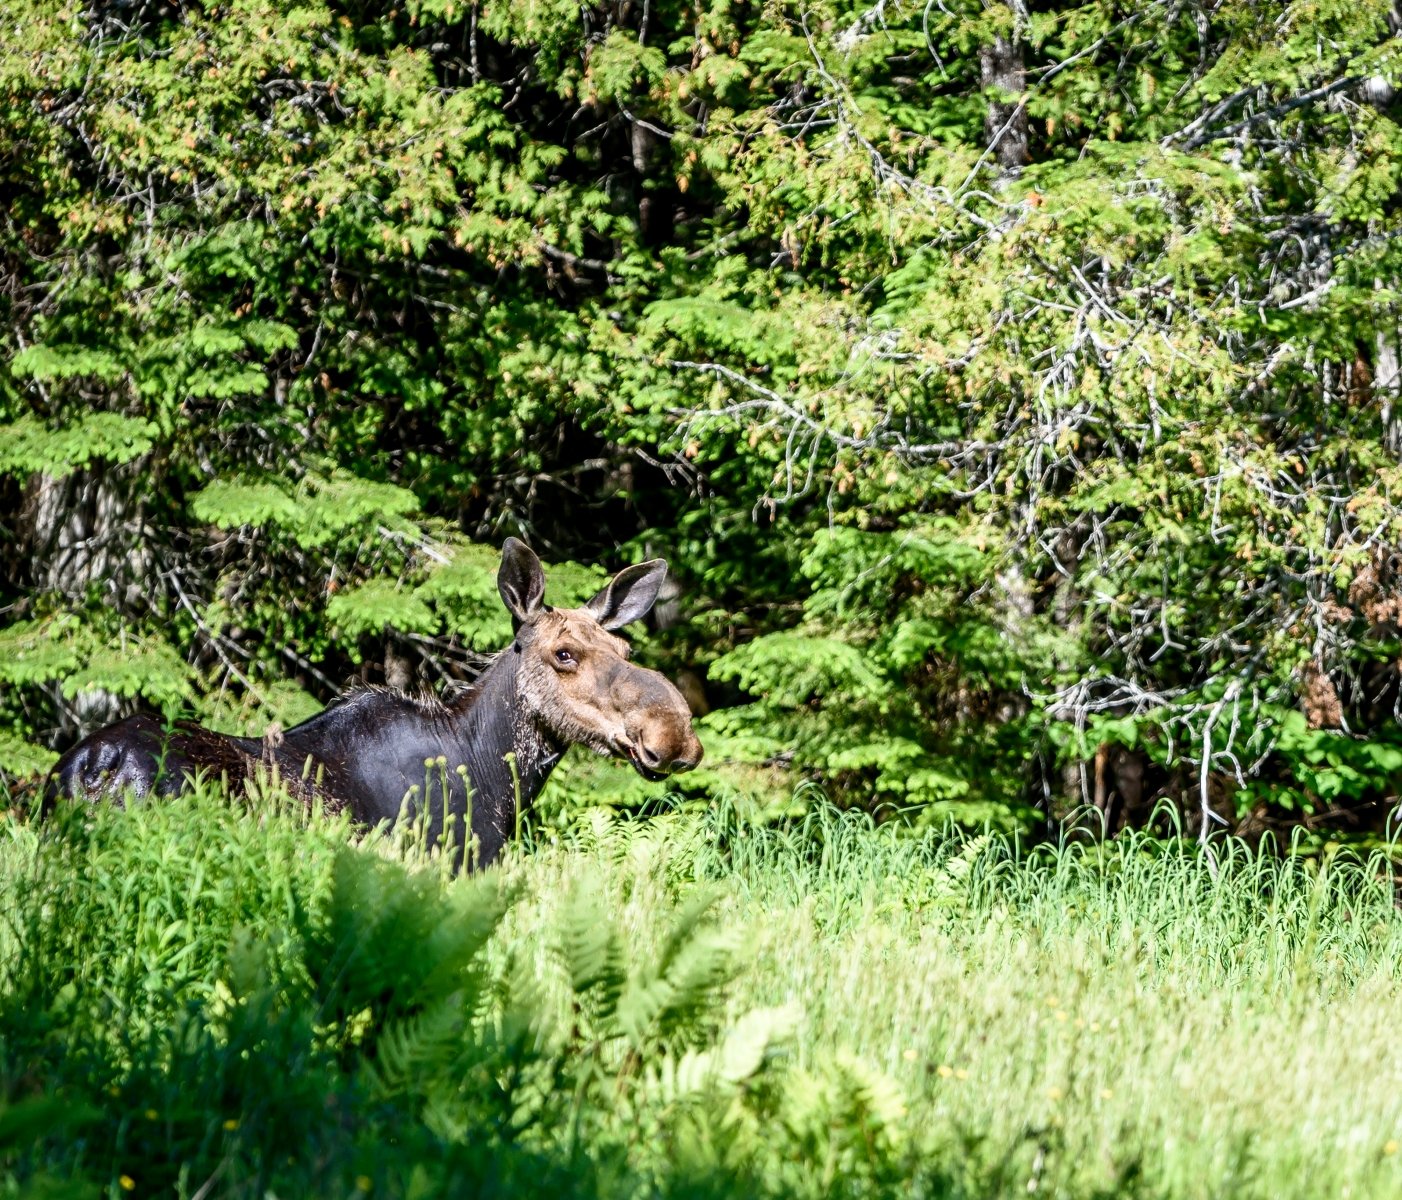 Female Eastern Moose (Alces alces americana) Standing in a Wooded Pasture in Rangeley Maine.jpeg